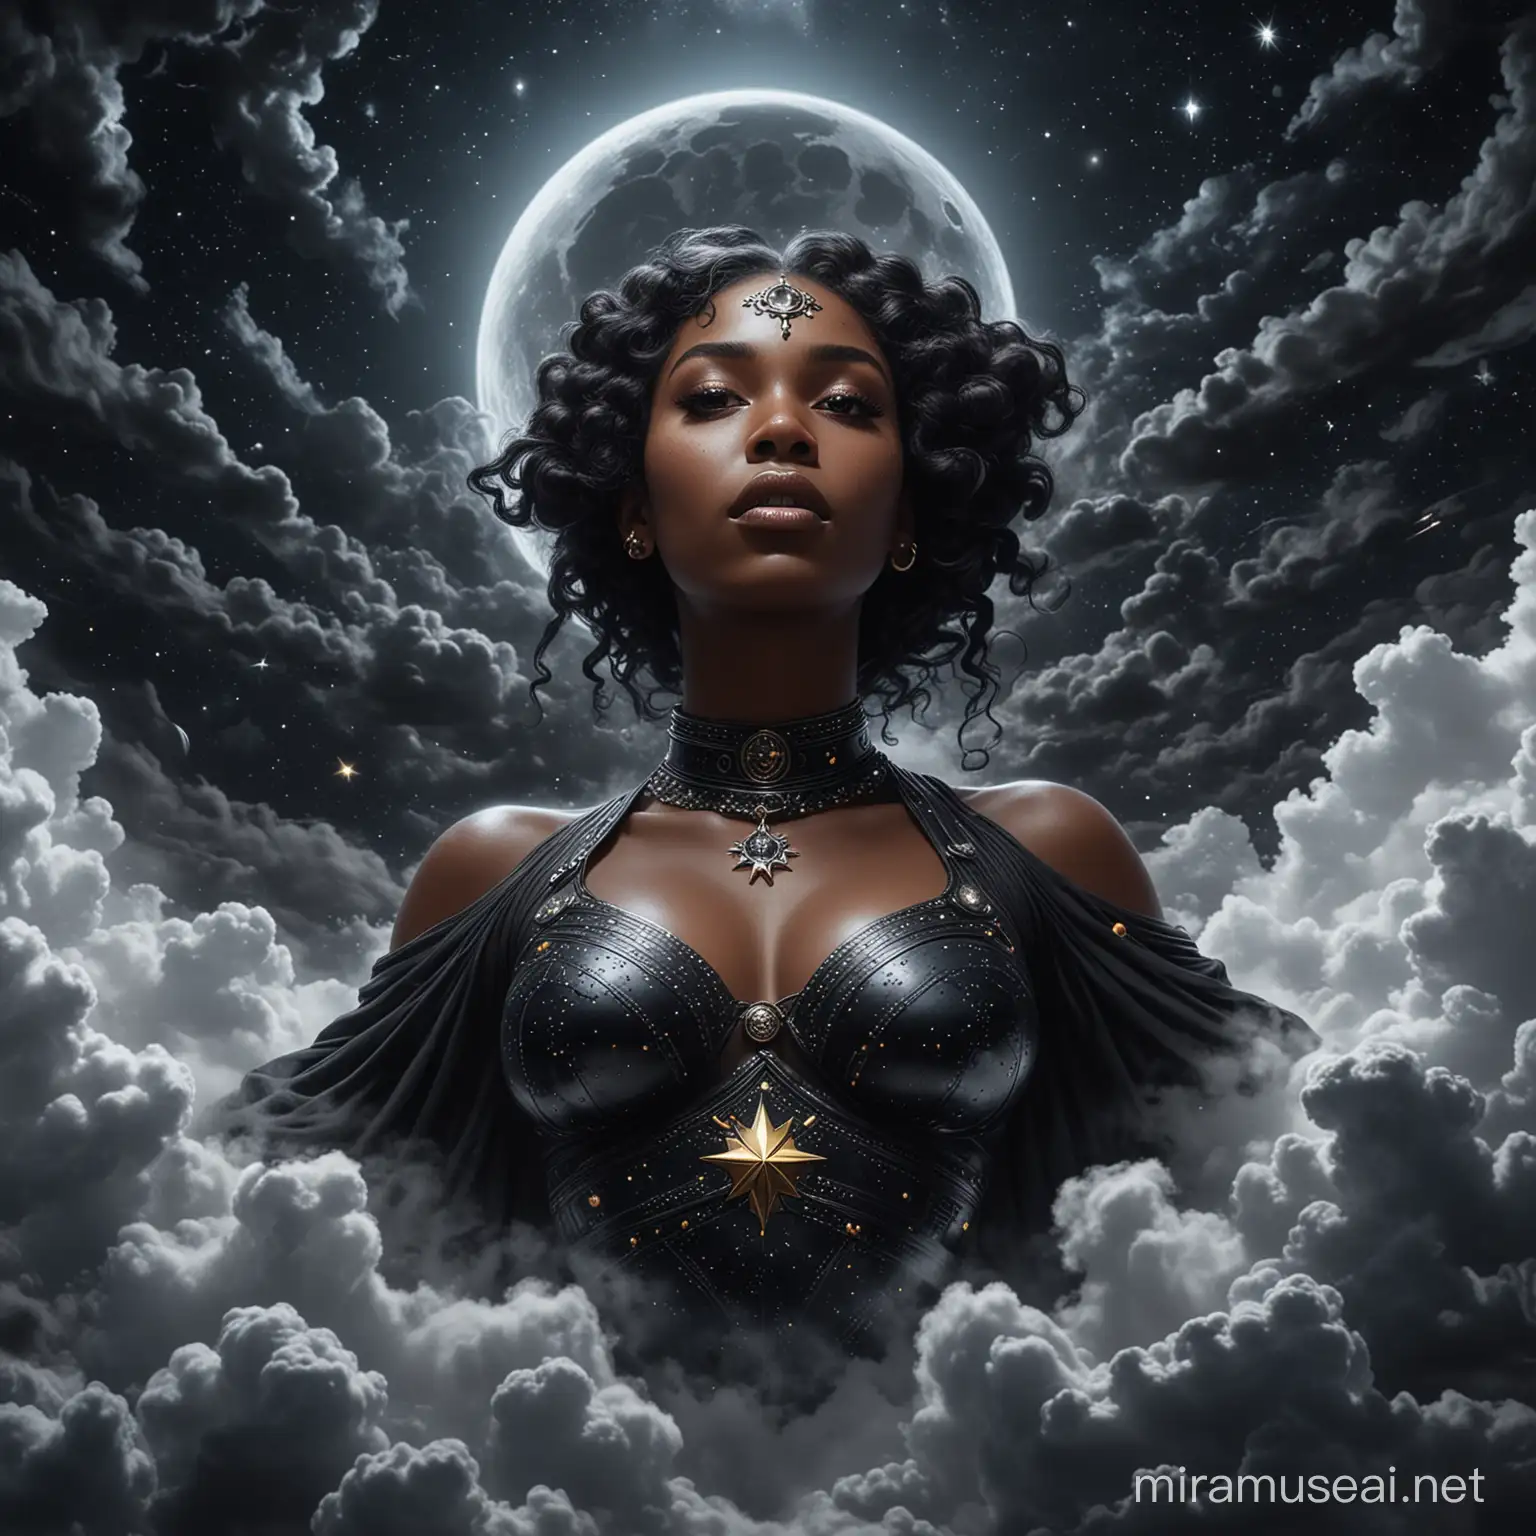 Upclose black female goddess floating thru the clouds at night with stars and moon hyper realism 35mm star wars inspired
